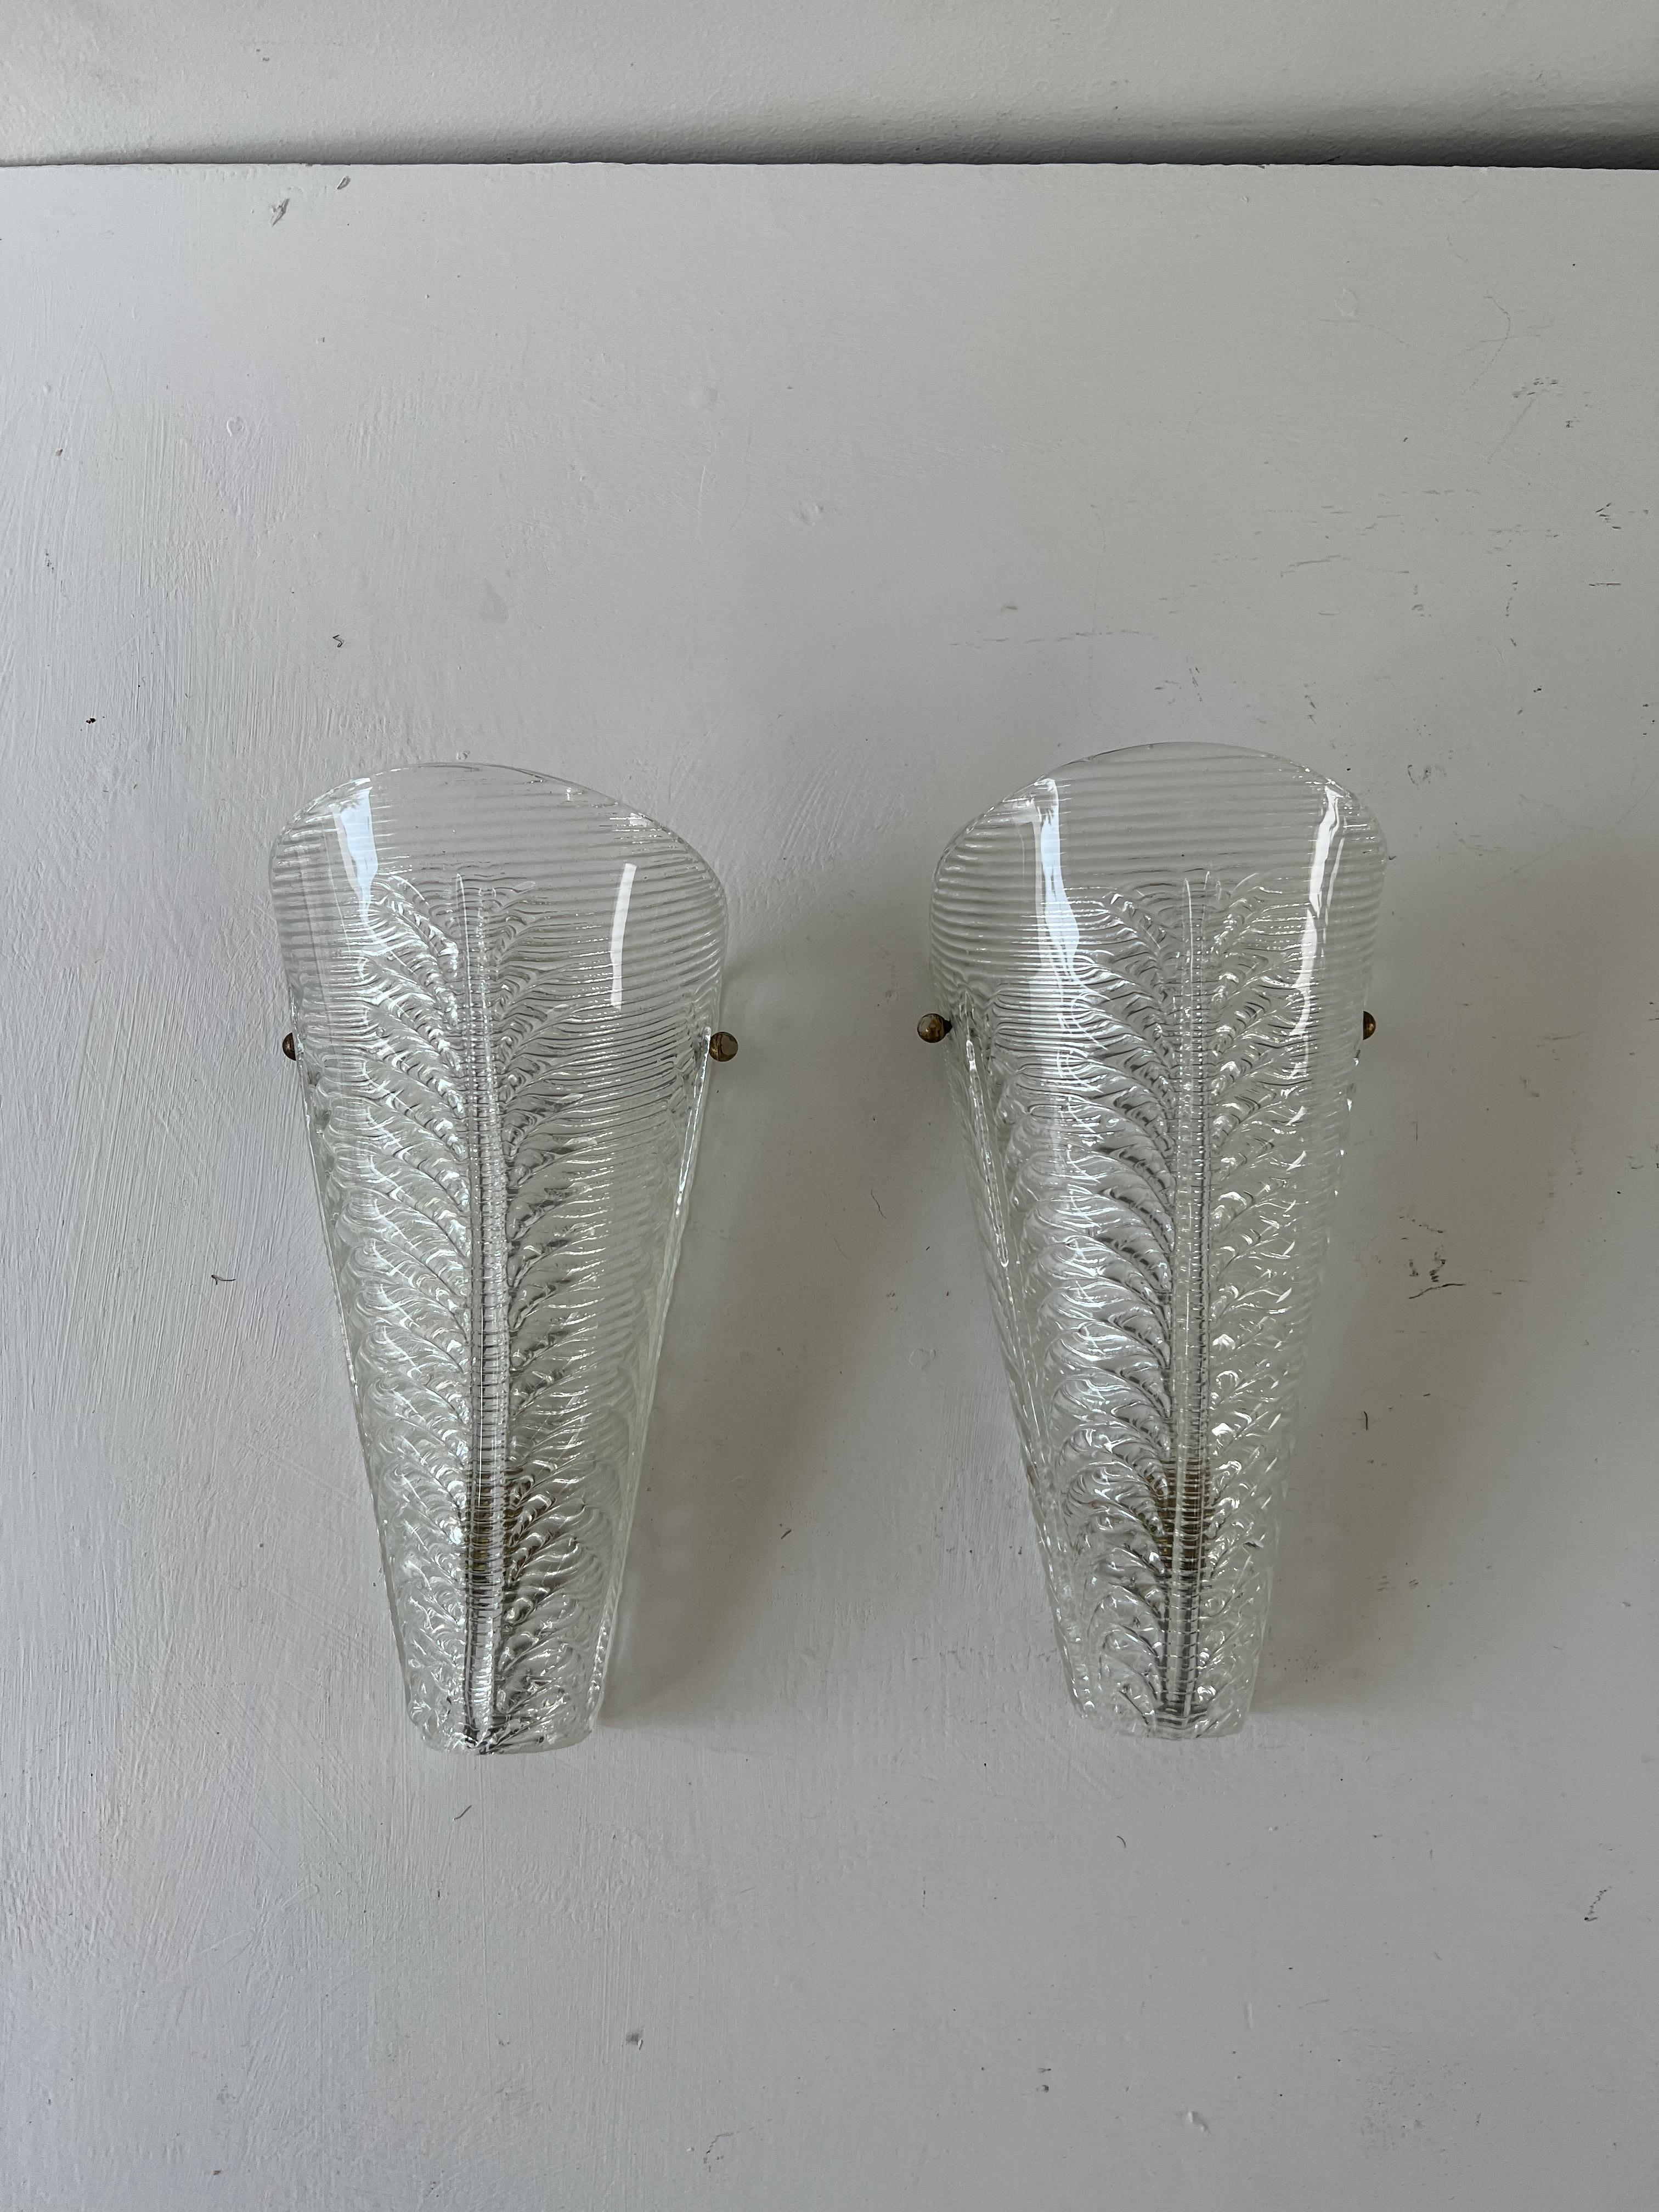 Pair of Art Deco Sconces, circa 1940 by Seguso in Murano Glass, Italy, 1940s For Sale 7